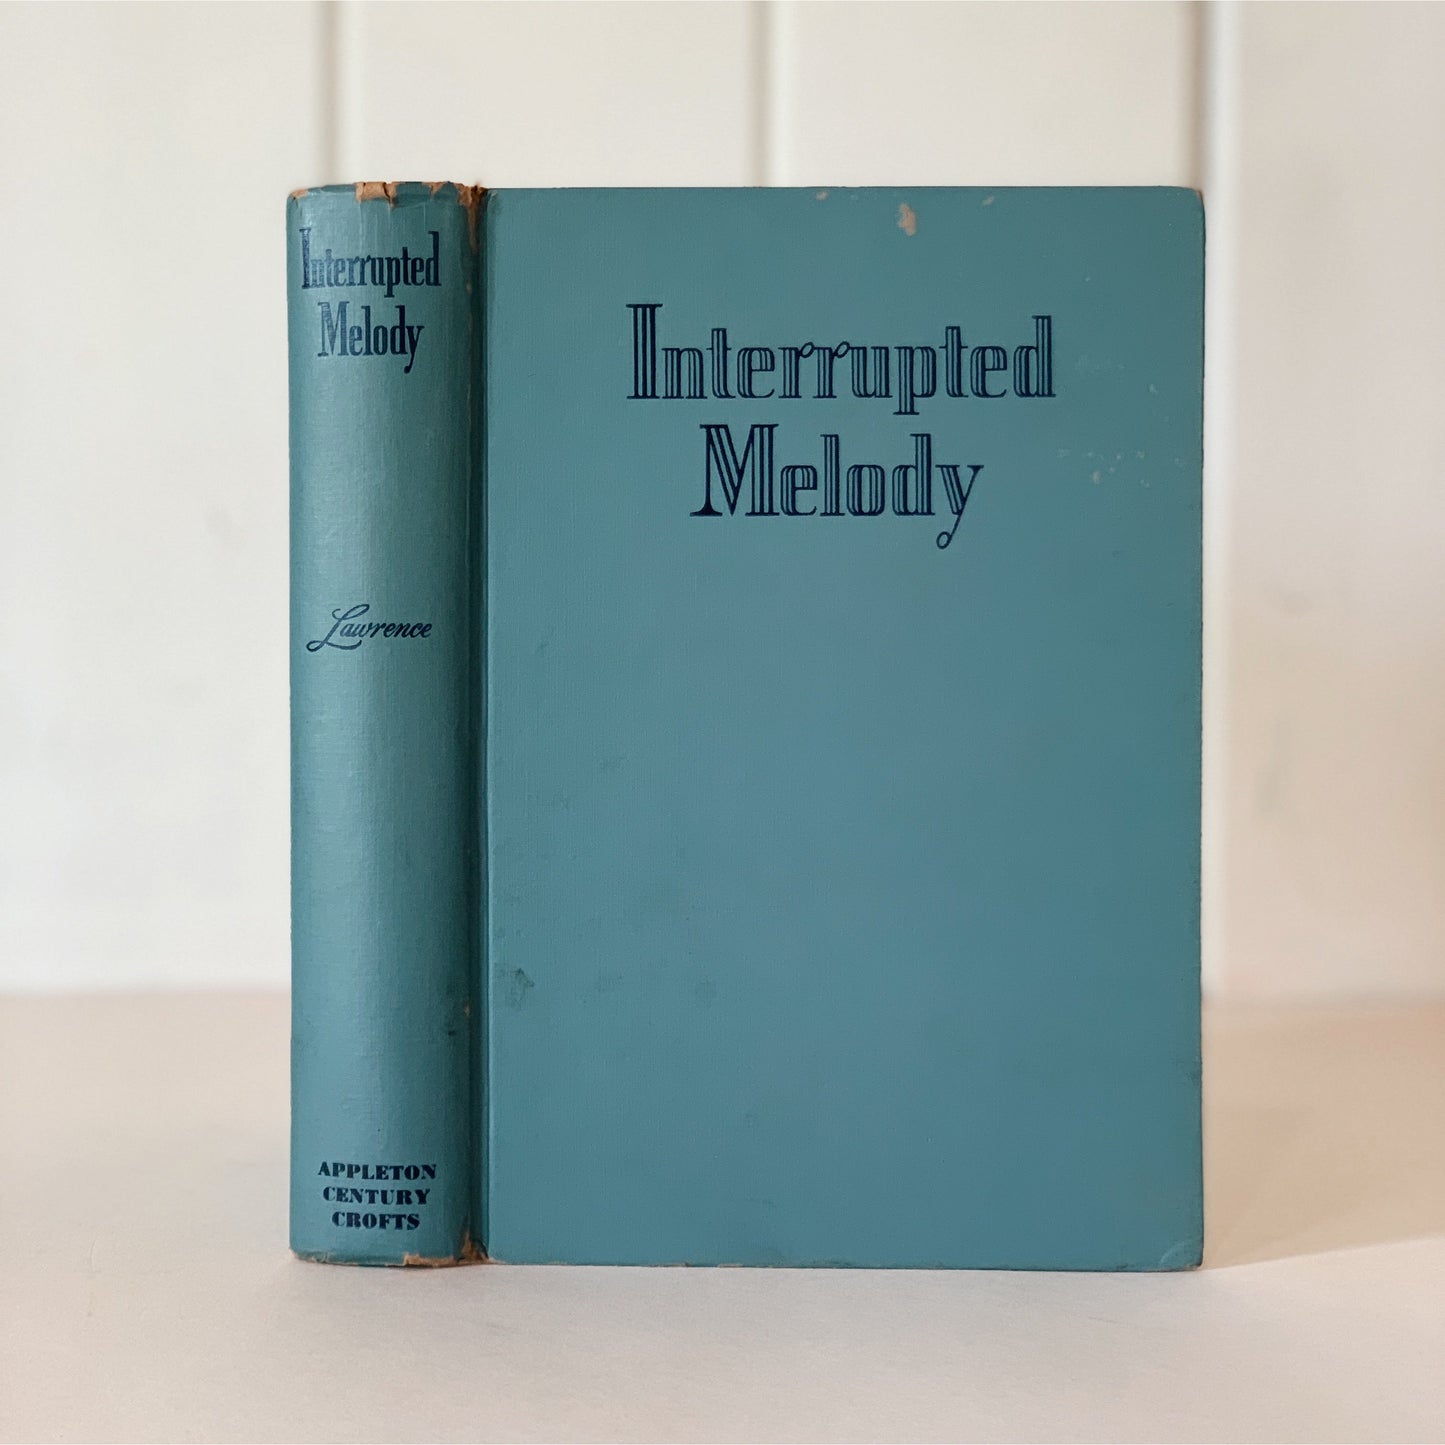 Interrupted Melody, Marjorie Lawrence, 1949, Autobiography 1st Edition